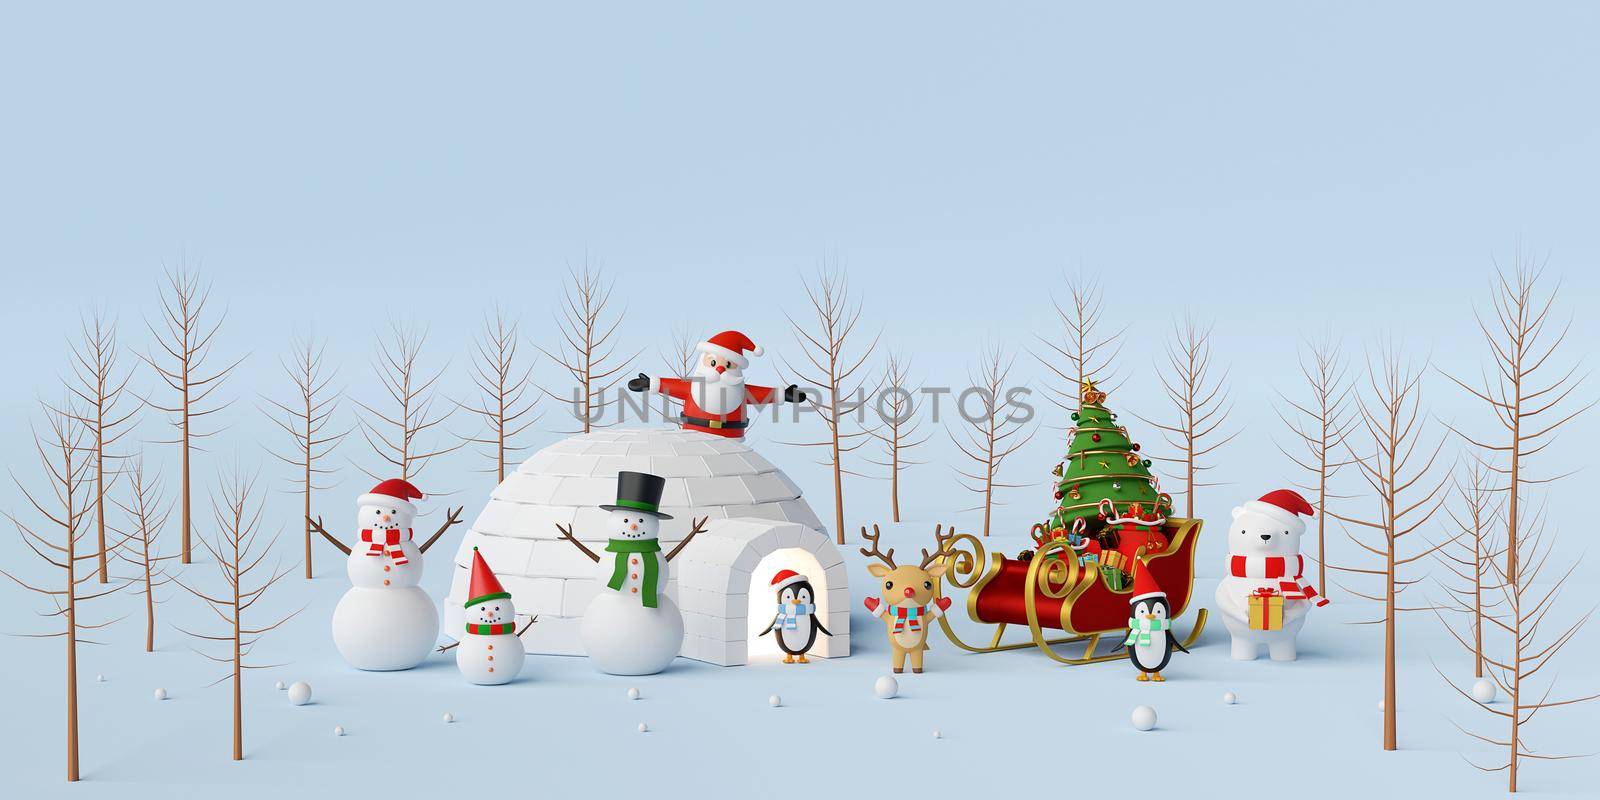 Merry Christmas and Happy New Year, Christmas celebration with Santa Claus and friend, 3d rendering by nutzchotwarut